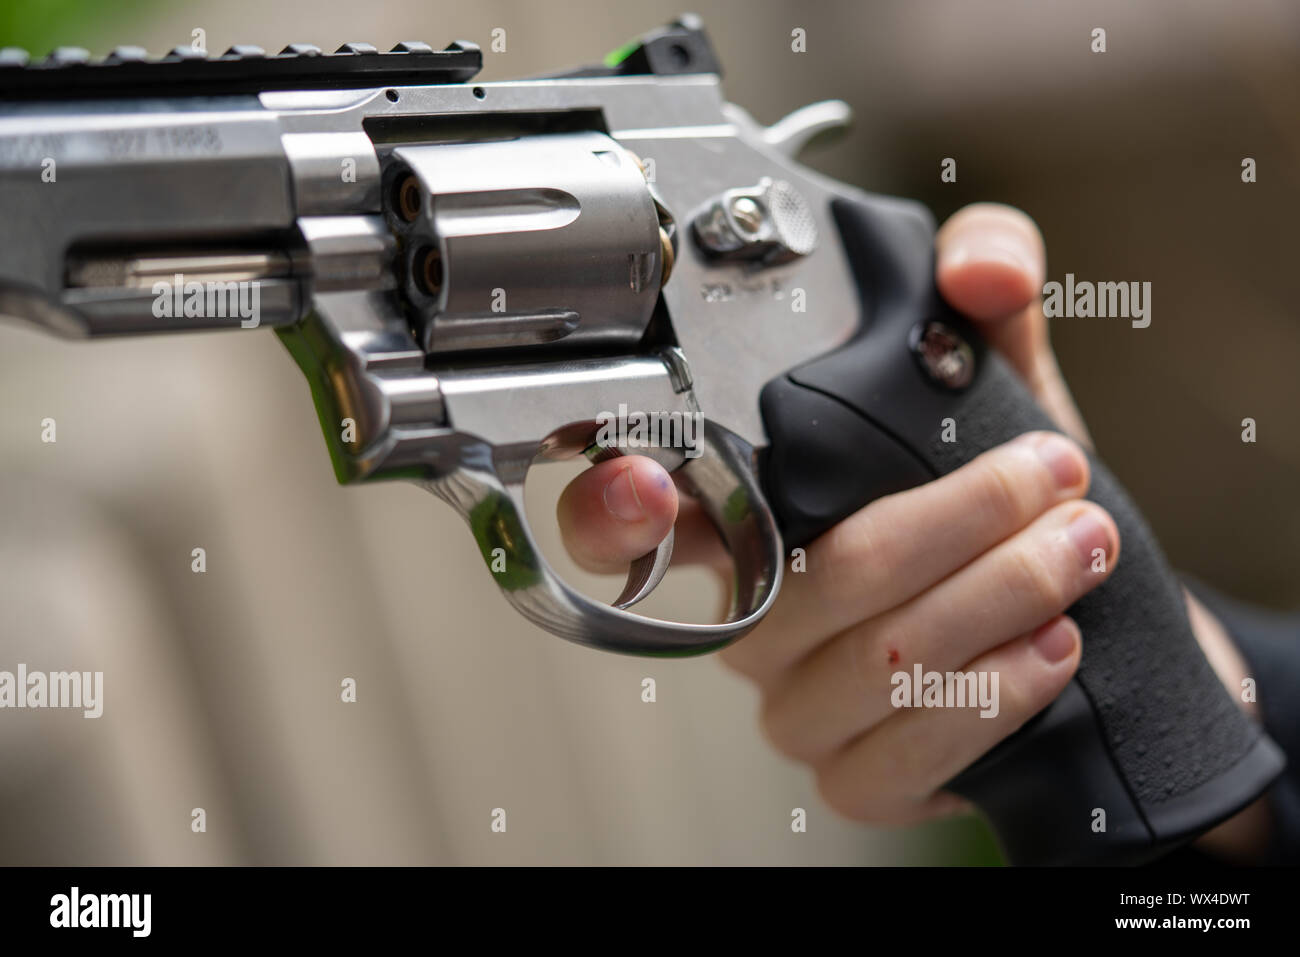 man playing russian roulette with magnum 44 revolver handgun model released  Stock Photo - Alamy